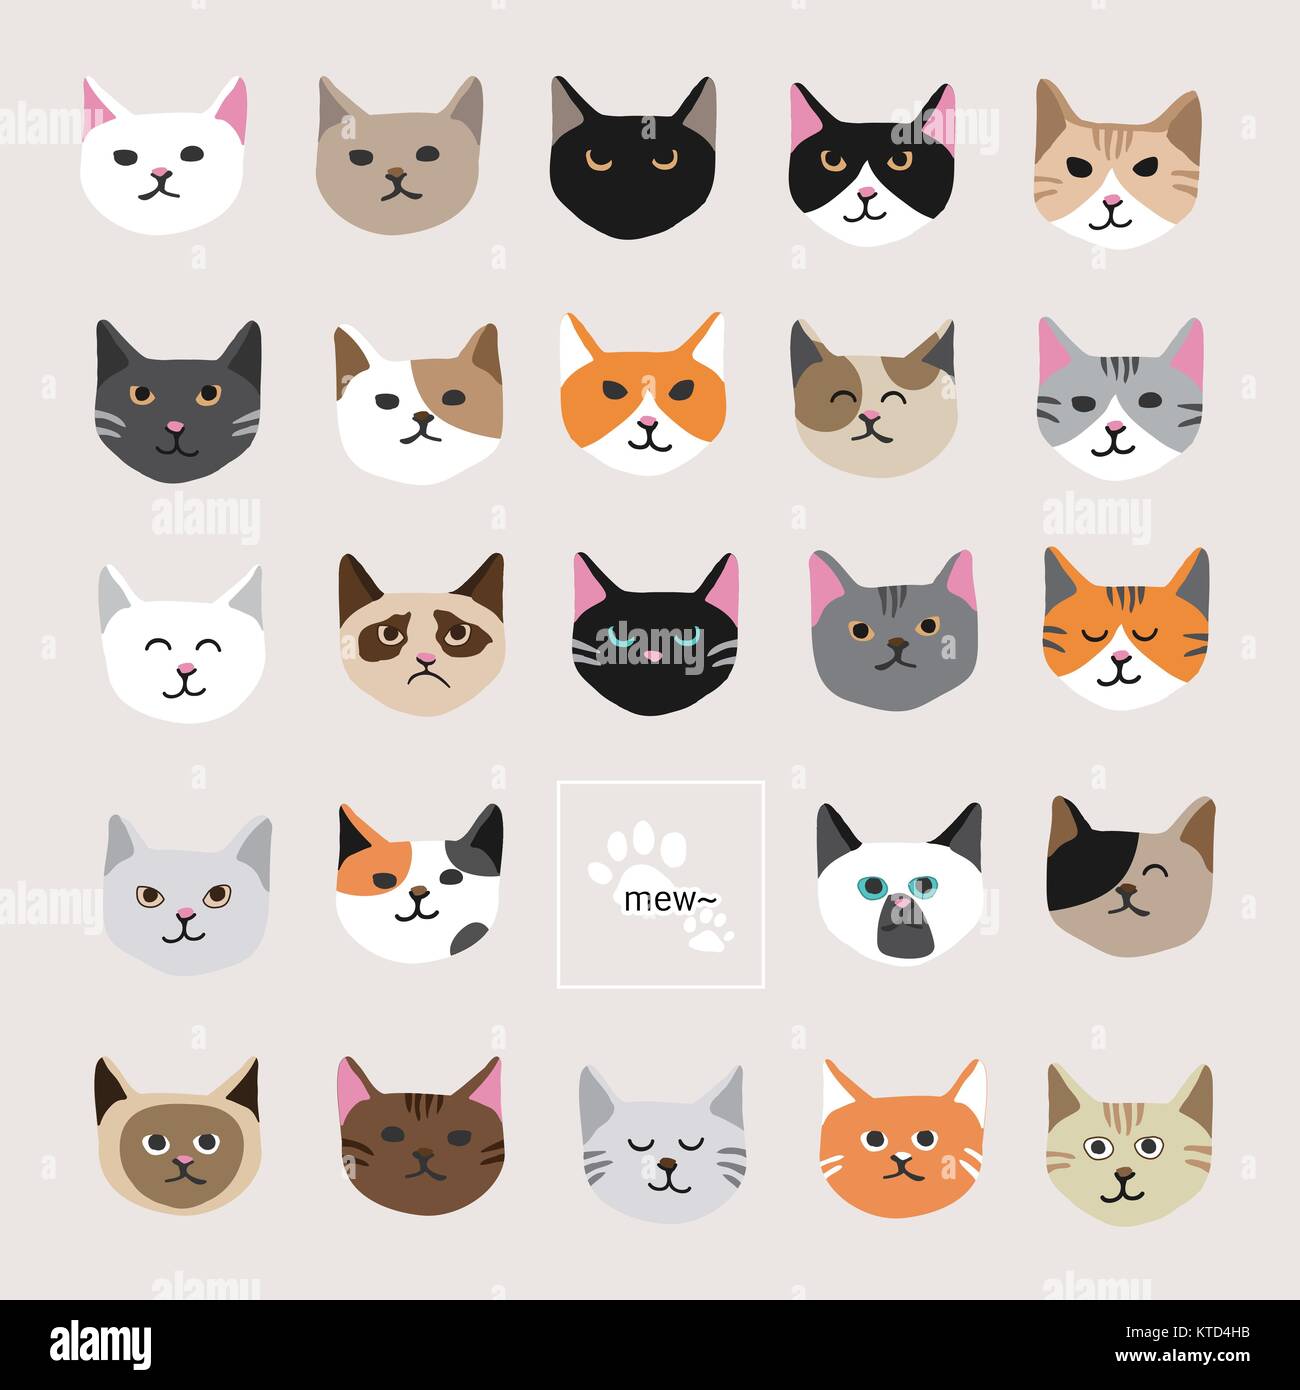 Cute Kitty cat face Collection. Stock Vektor